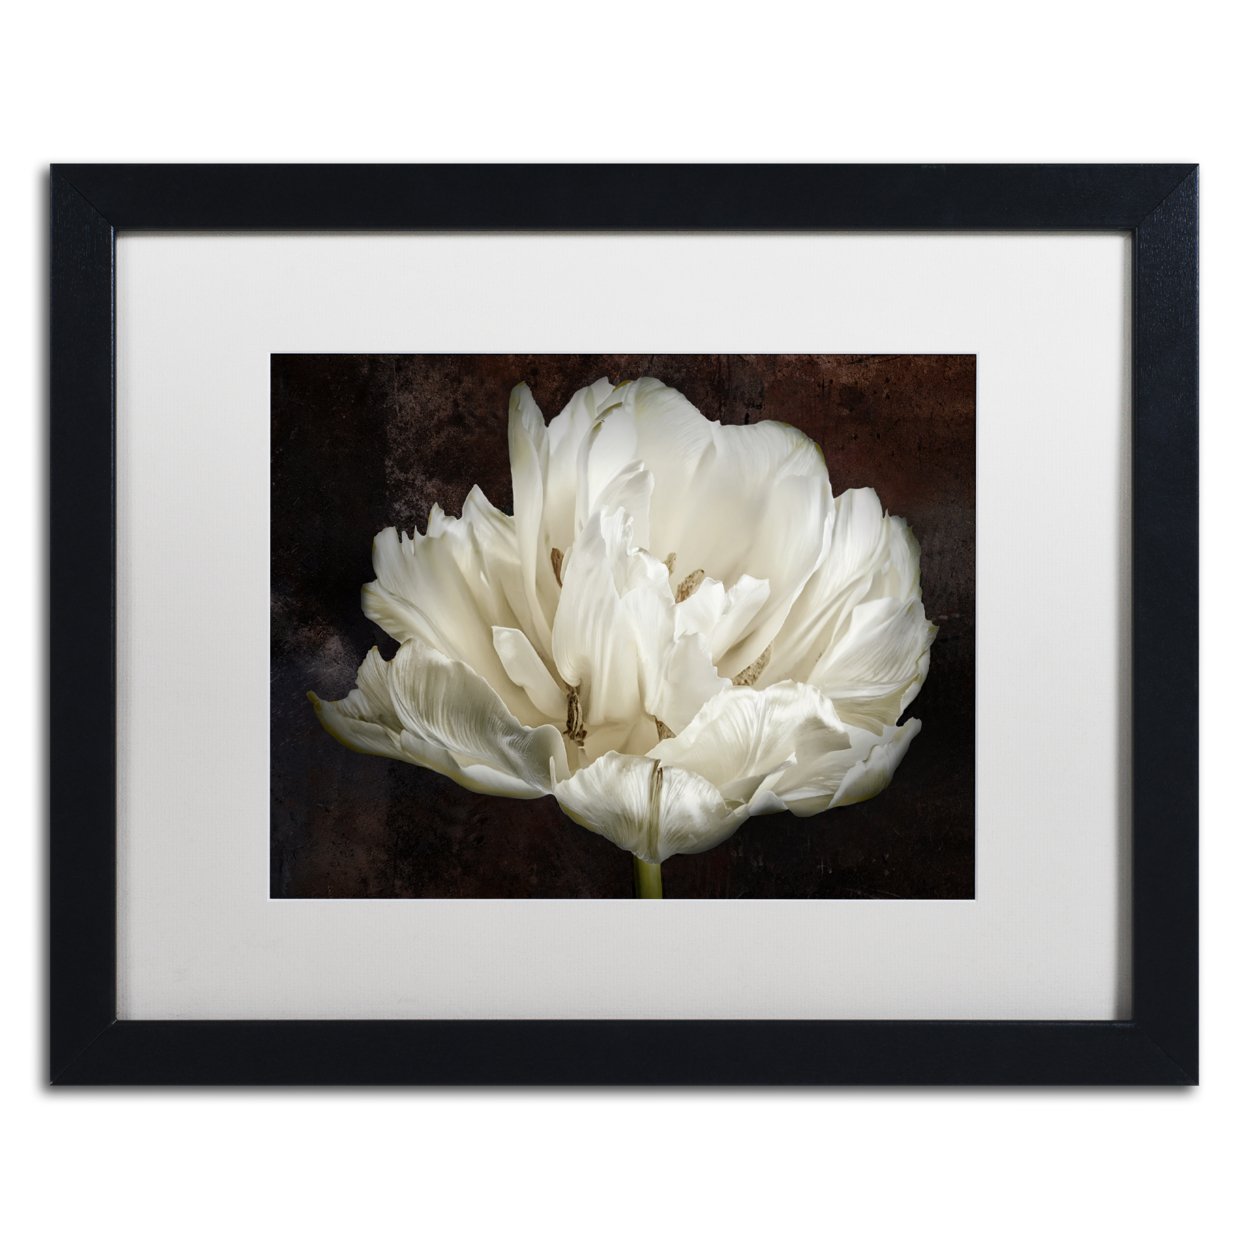 Cora Niele 'Double White Tulip' Black Wooden Framed Art 18 X 22 Inches